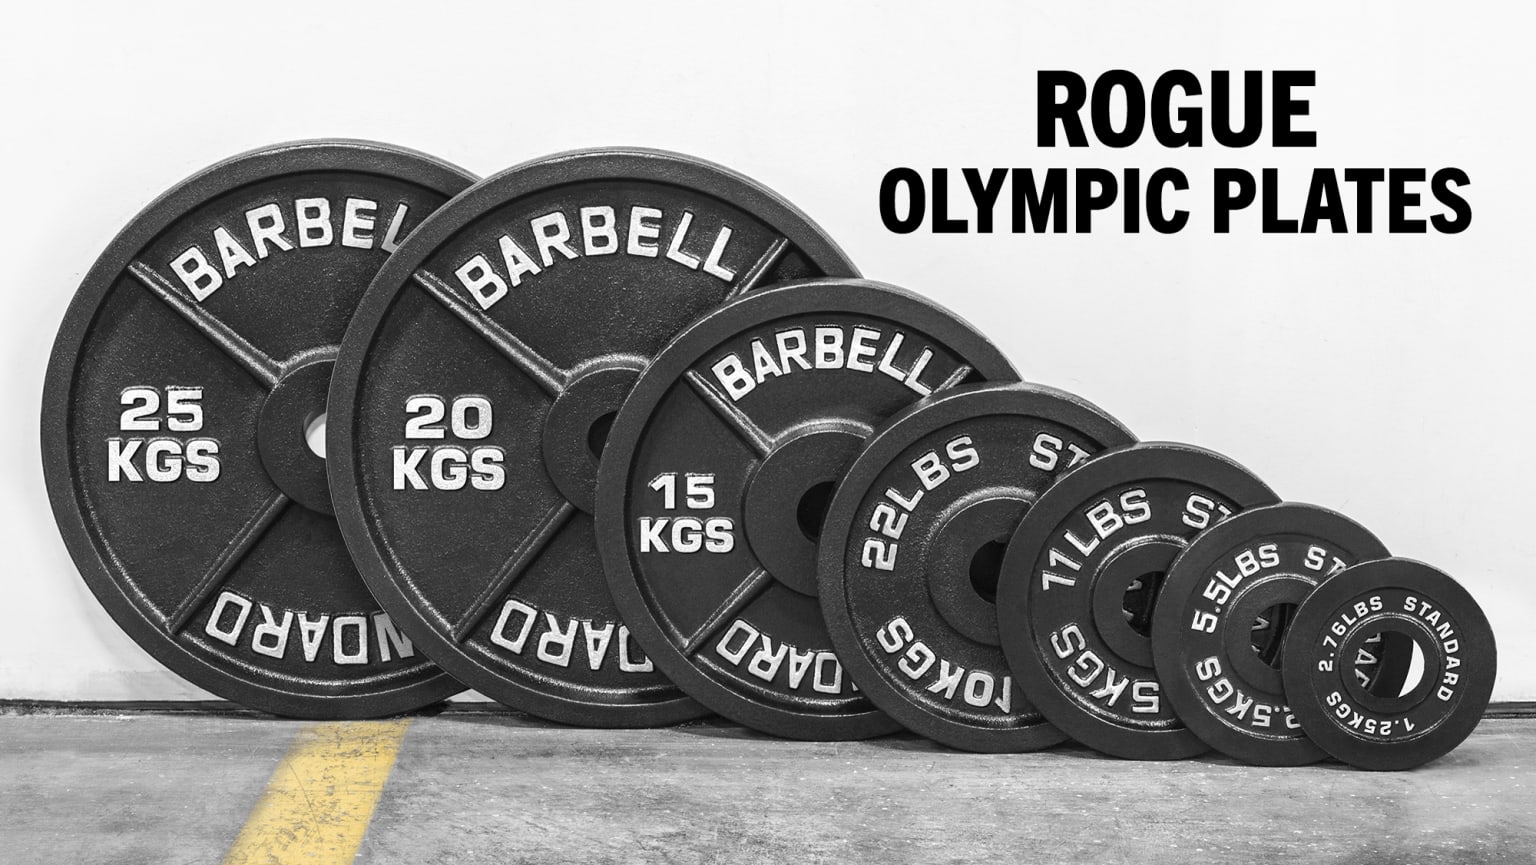 Rogue Olympic Plates - Cast Iron - Weightlifting